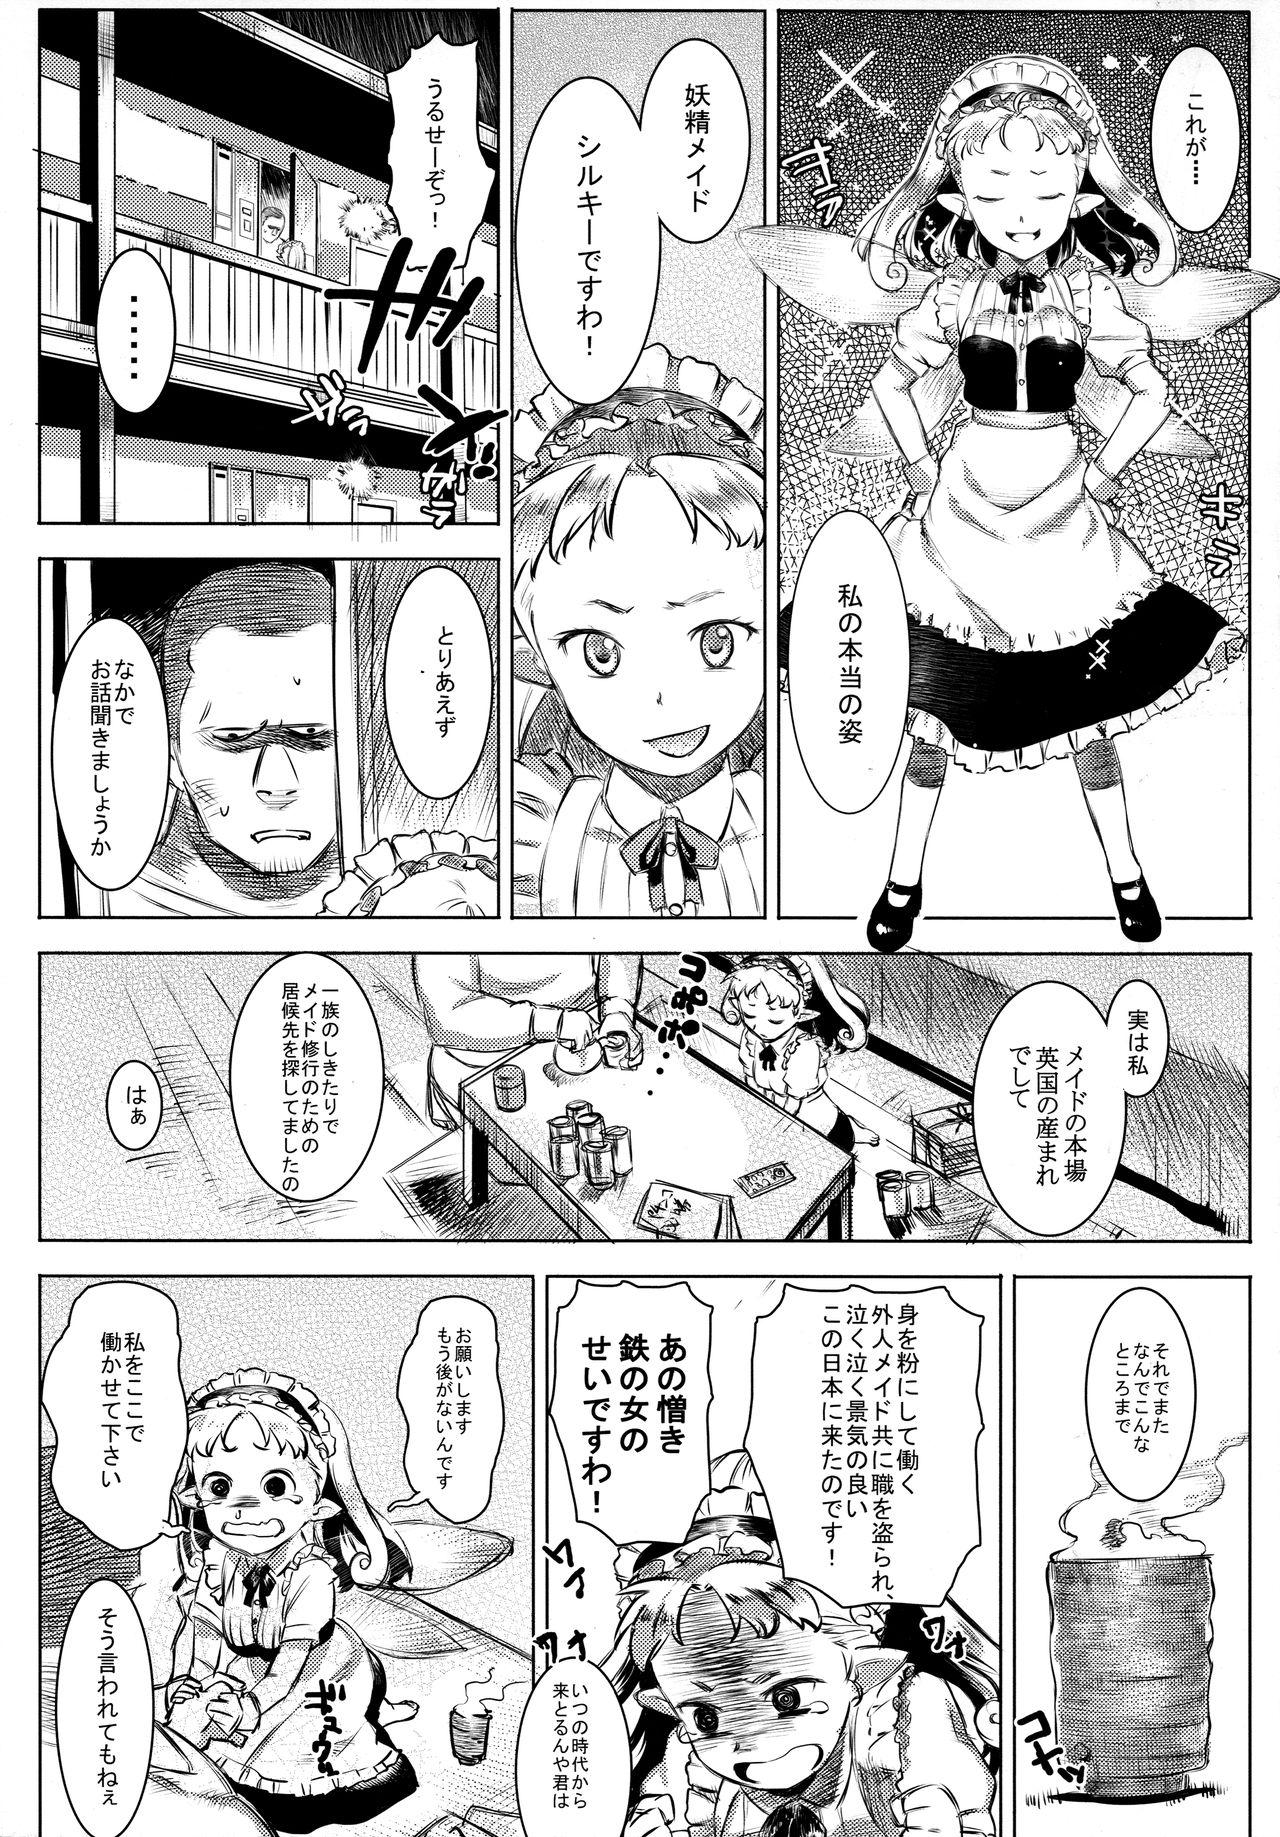 Longhair Yousei Maid Silkie - Original Solo Female - Page 5